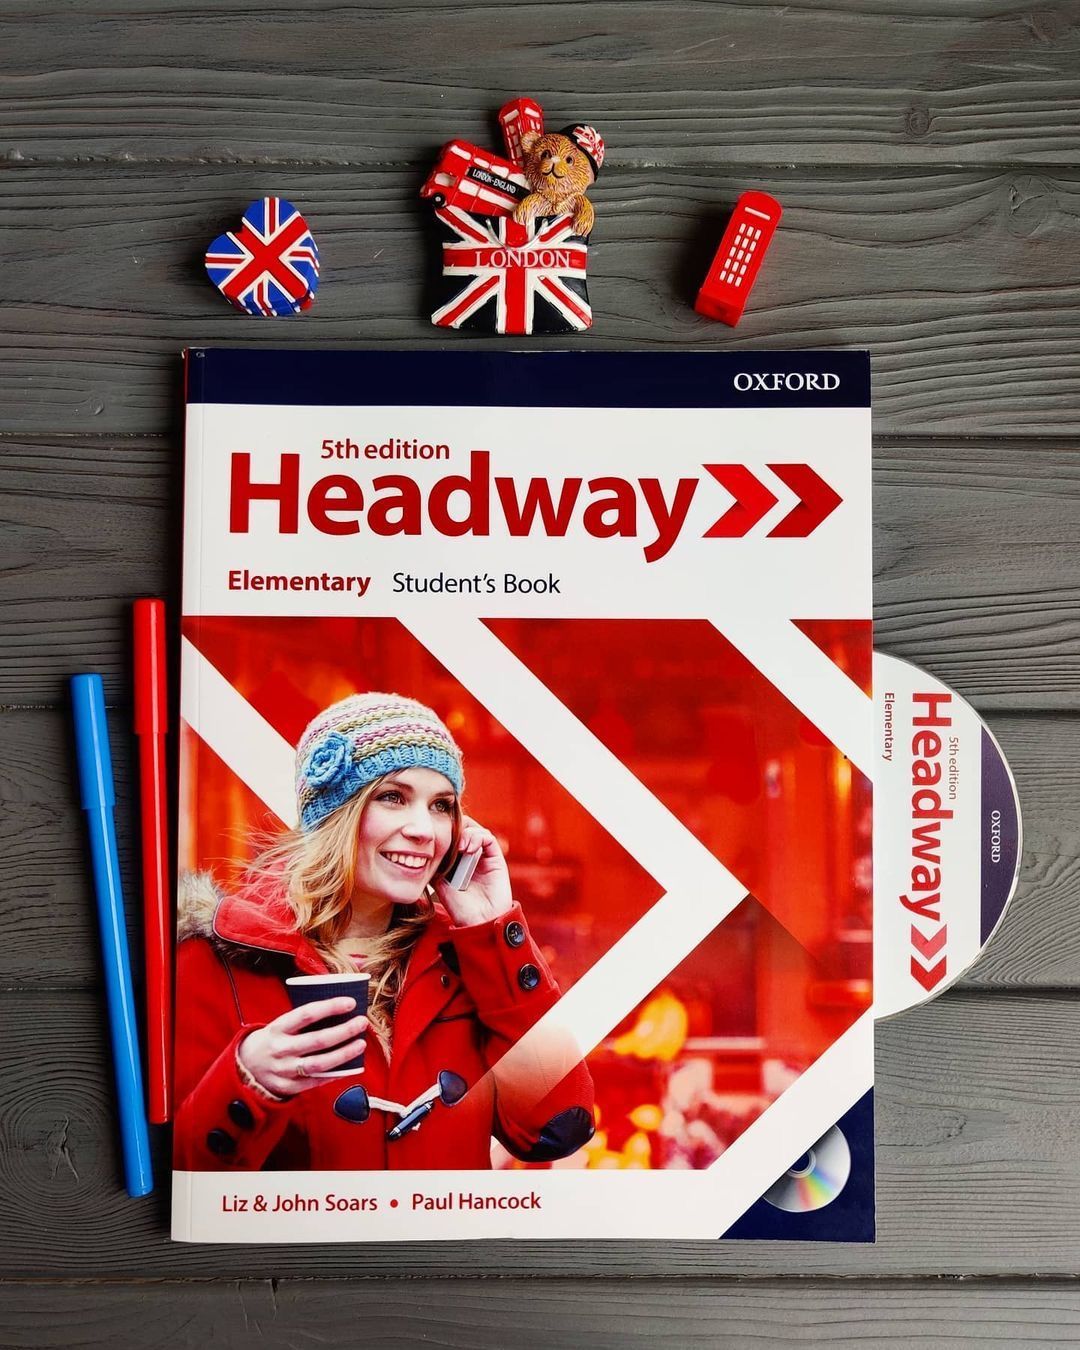 New headway 5th edition. Headway Elementary 5th Edition. Book made Headway Elementary 5th Edition. New Headway Elementary 5th Edition Tests pdf.